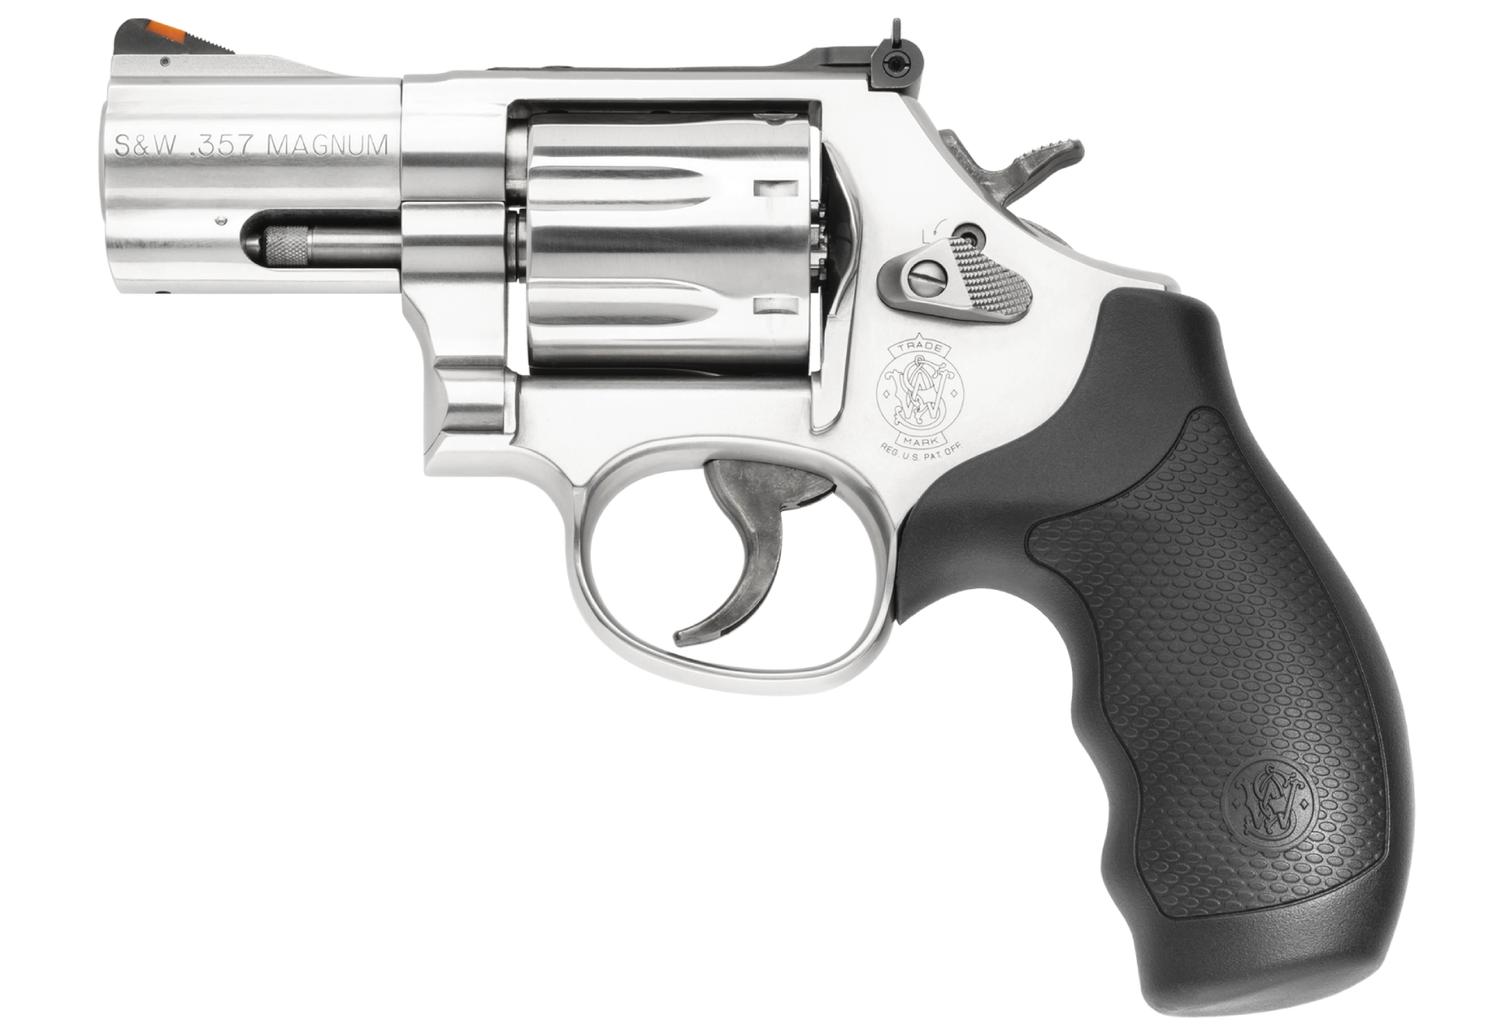  Model 686 Plus .357mag 7rd 2.5in - Satin Stainless